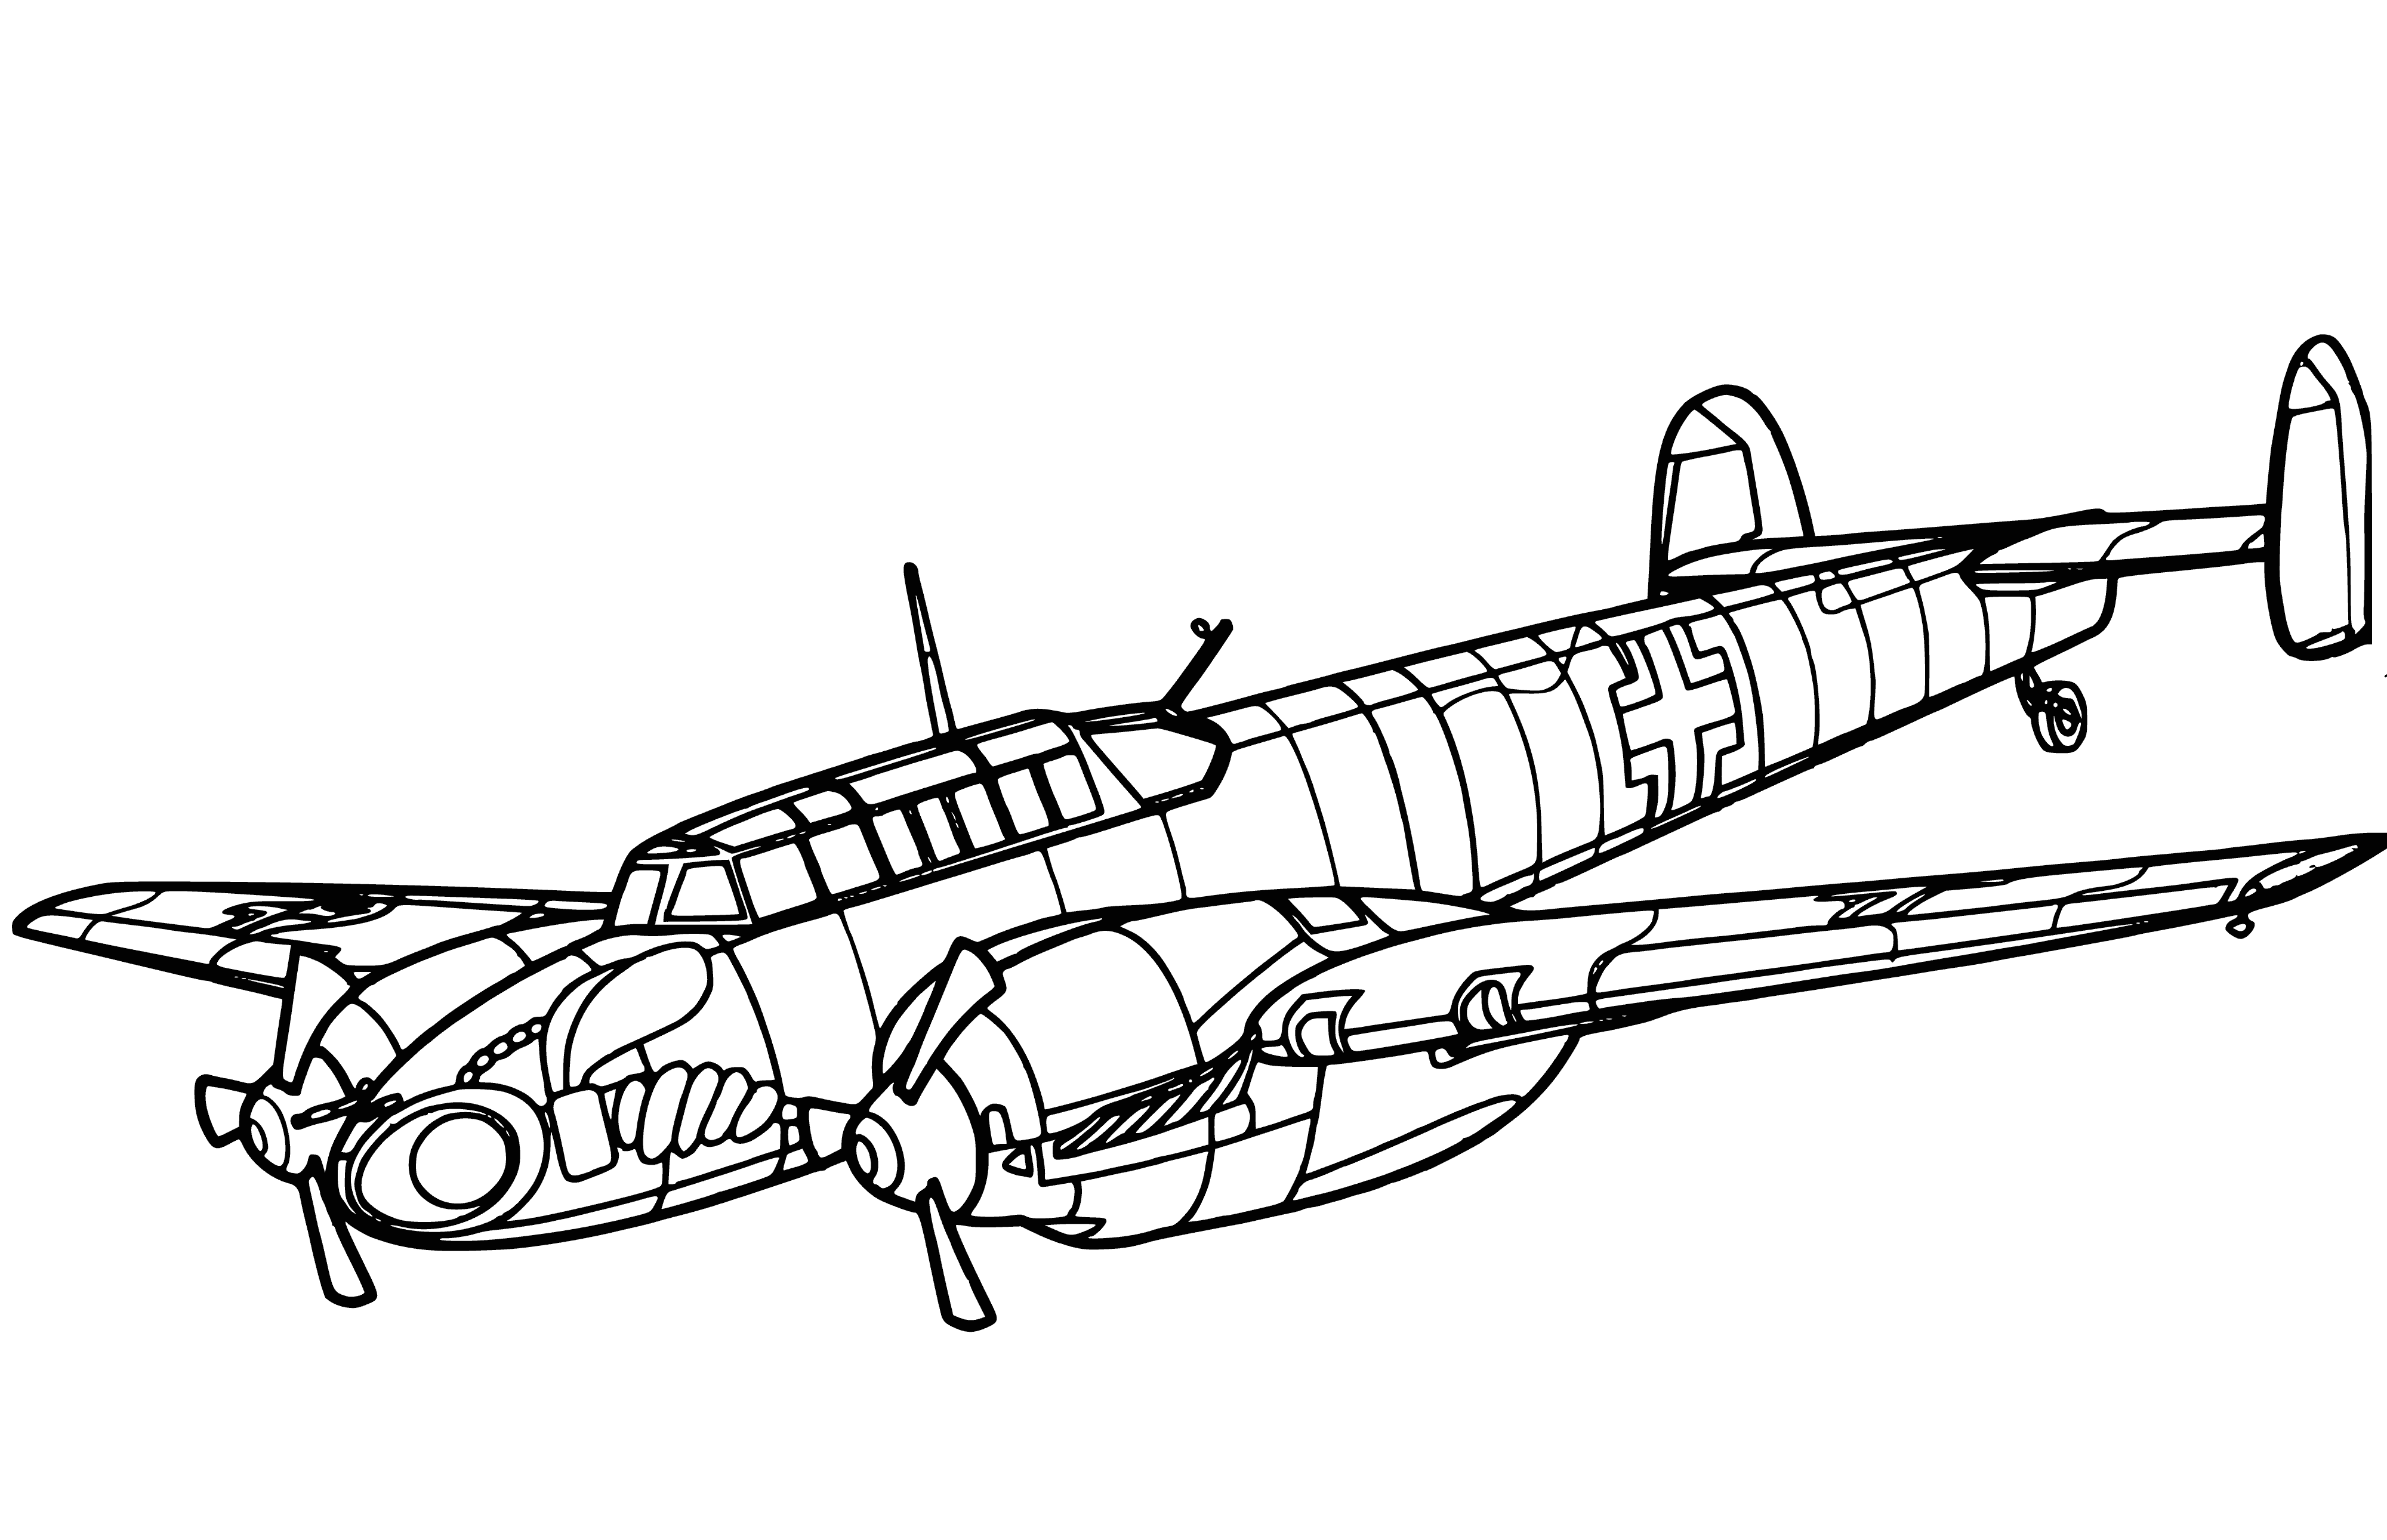 coloring page: German WWII fighter, Messerschmitt Bf 100 had a single engine, wing cannons and high speed, making it one of fastest fighters of its time.